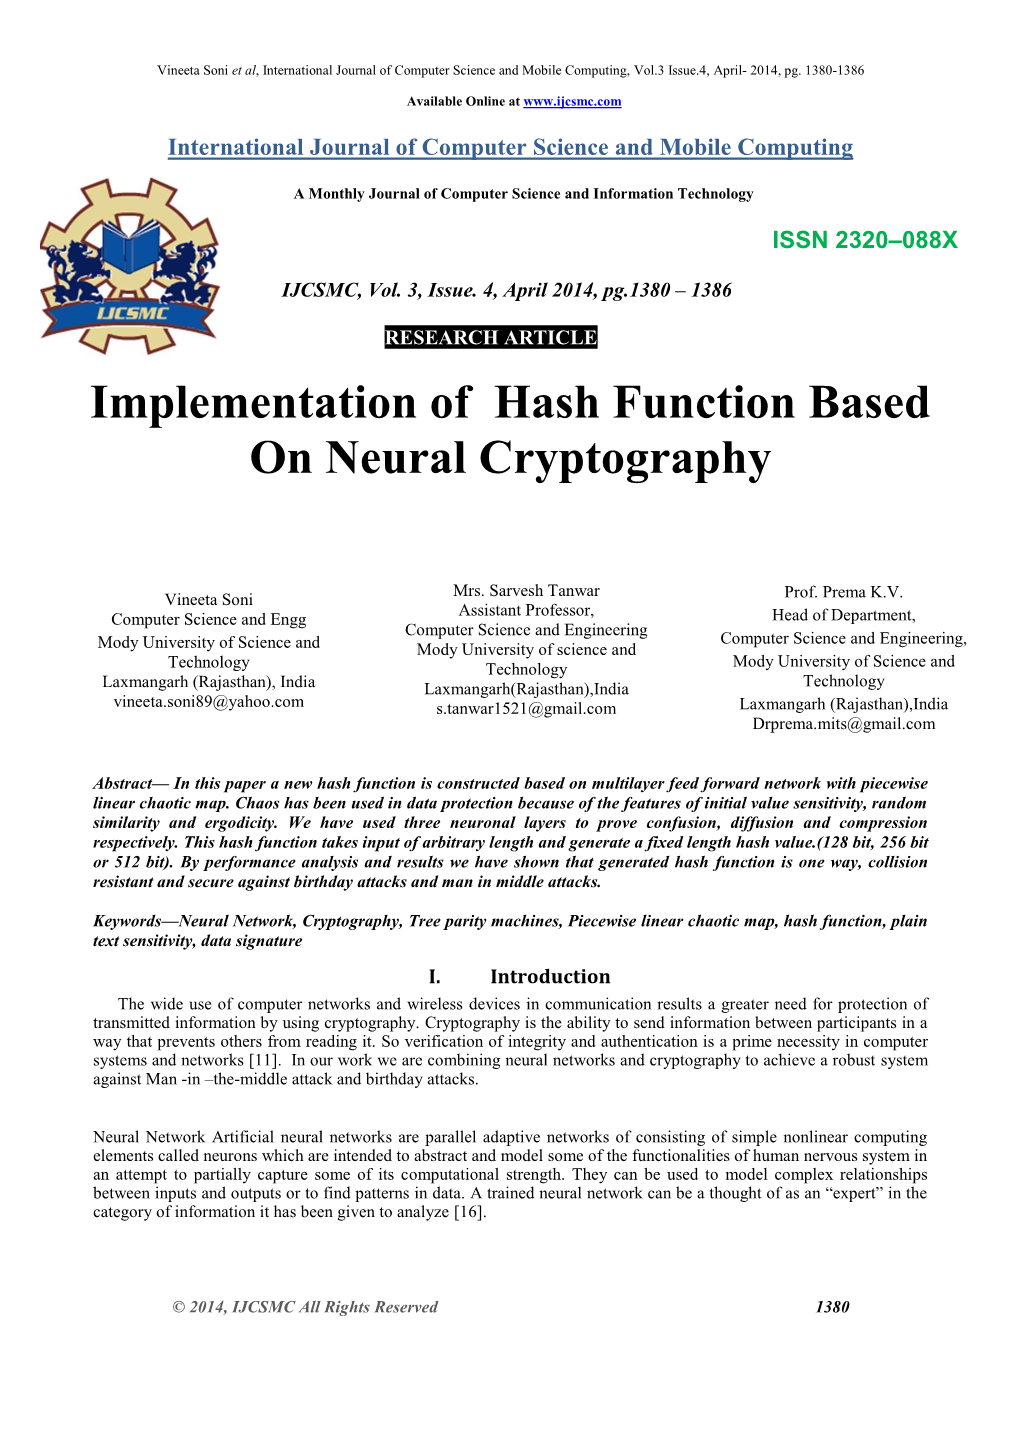 Implementation of Hash Function Based on Neural Cryptography